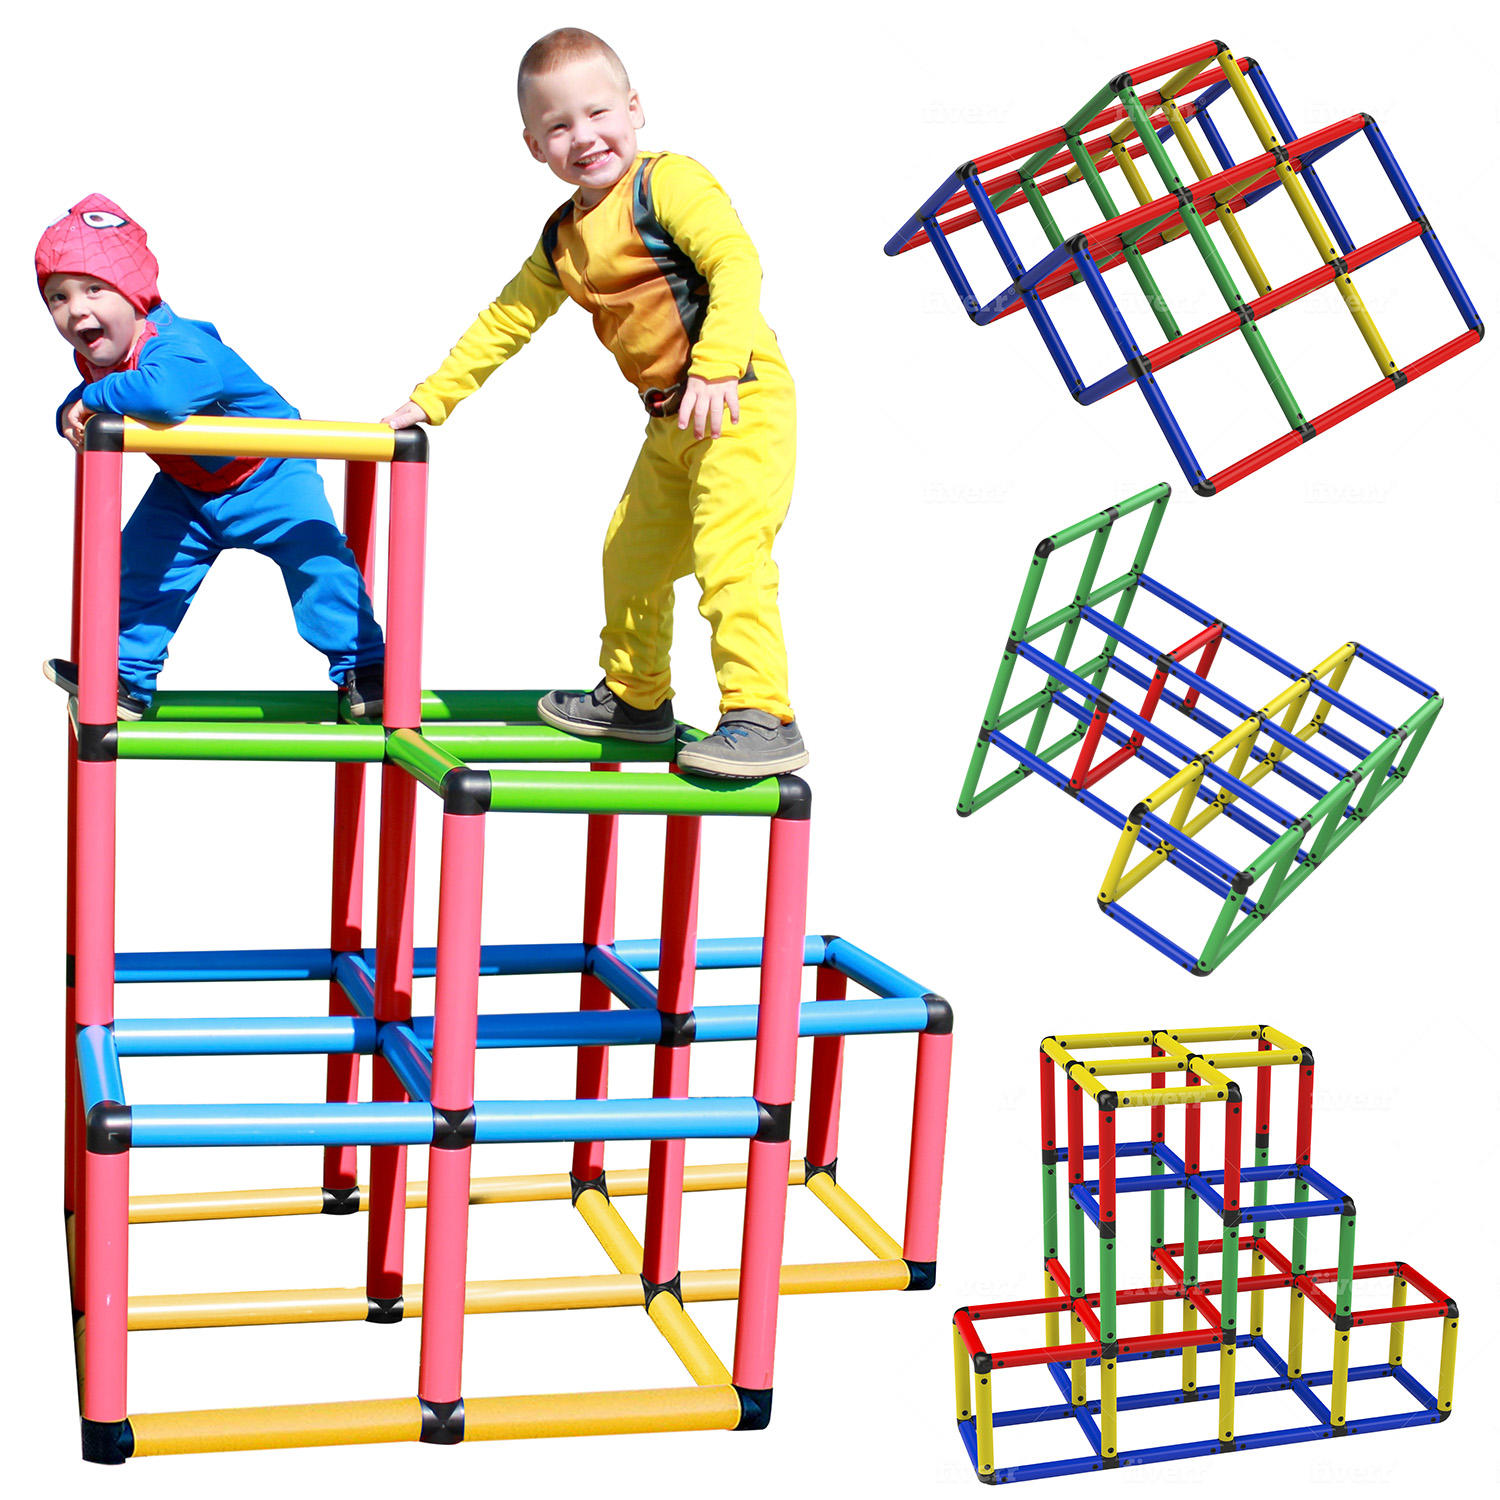 Funphix Create and Play Life Size Structures, Climbing Gyms